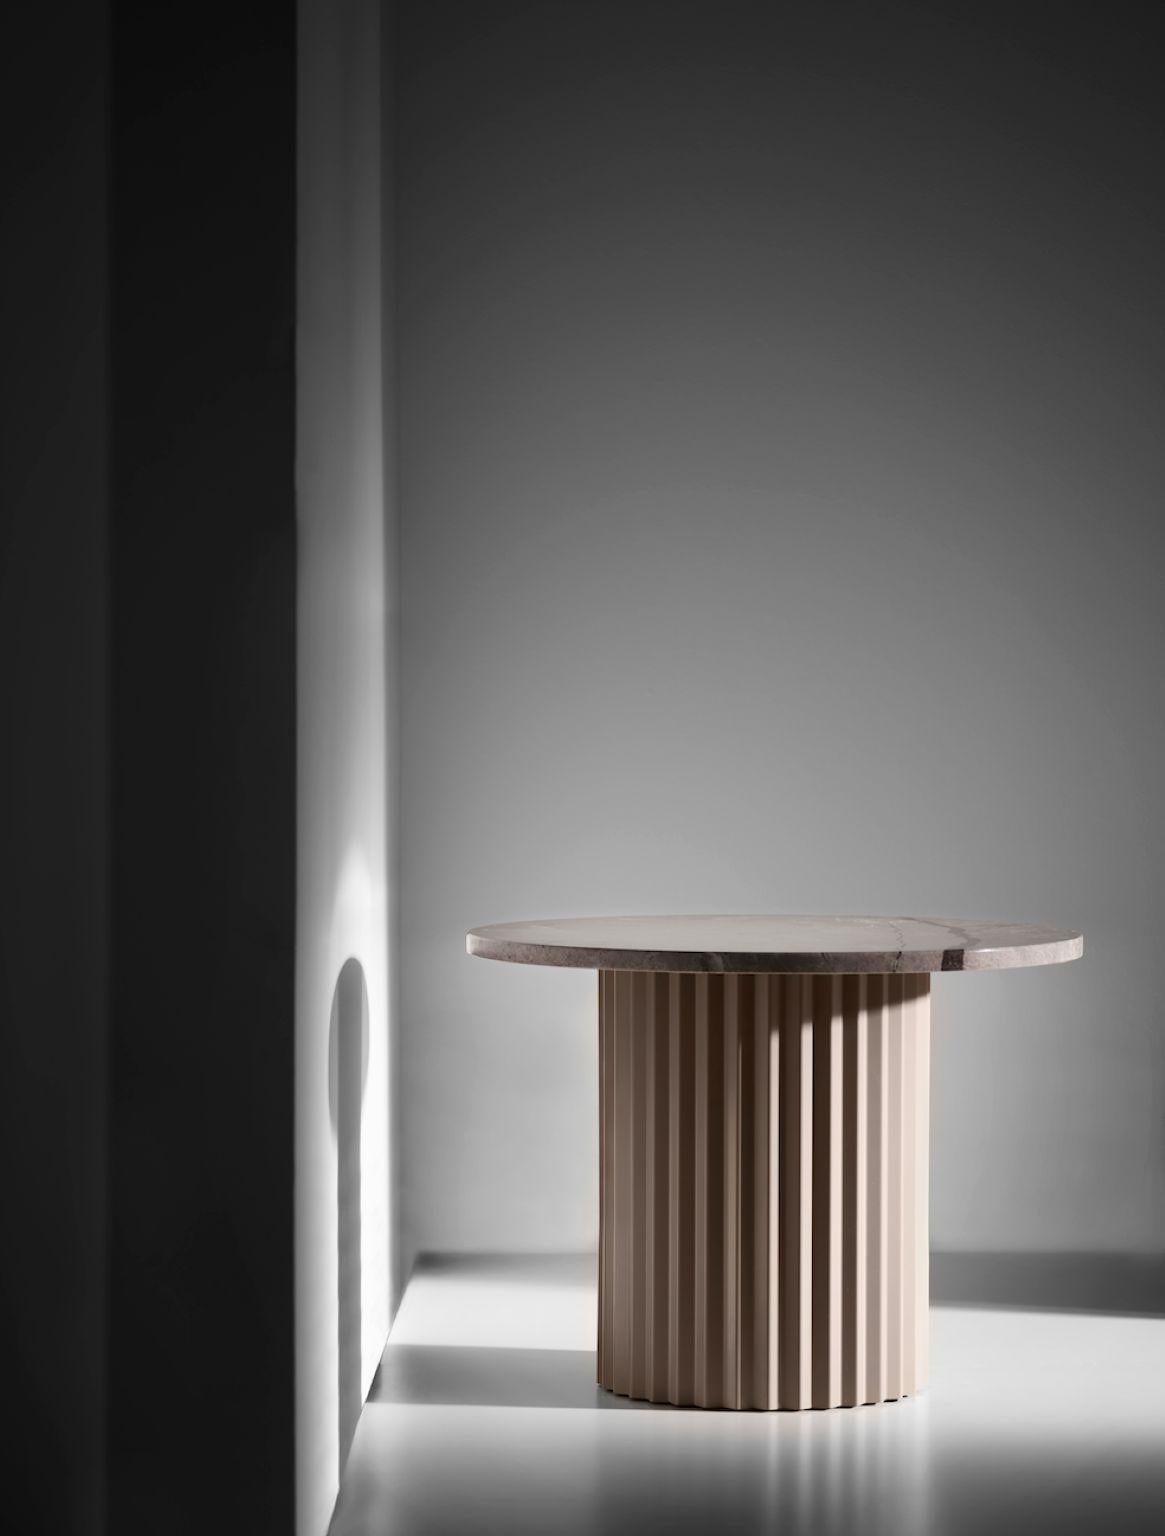 Column lounge table 60 by Lisette Rützou
Dimensions: D 60 x H 41 cm
Materials: Steel, Marble tabletop
Also available Ø 40

 Lisette Rützou’s design is motivated by an urge to articulate a story. Inspired by the beauty of materials, form and